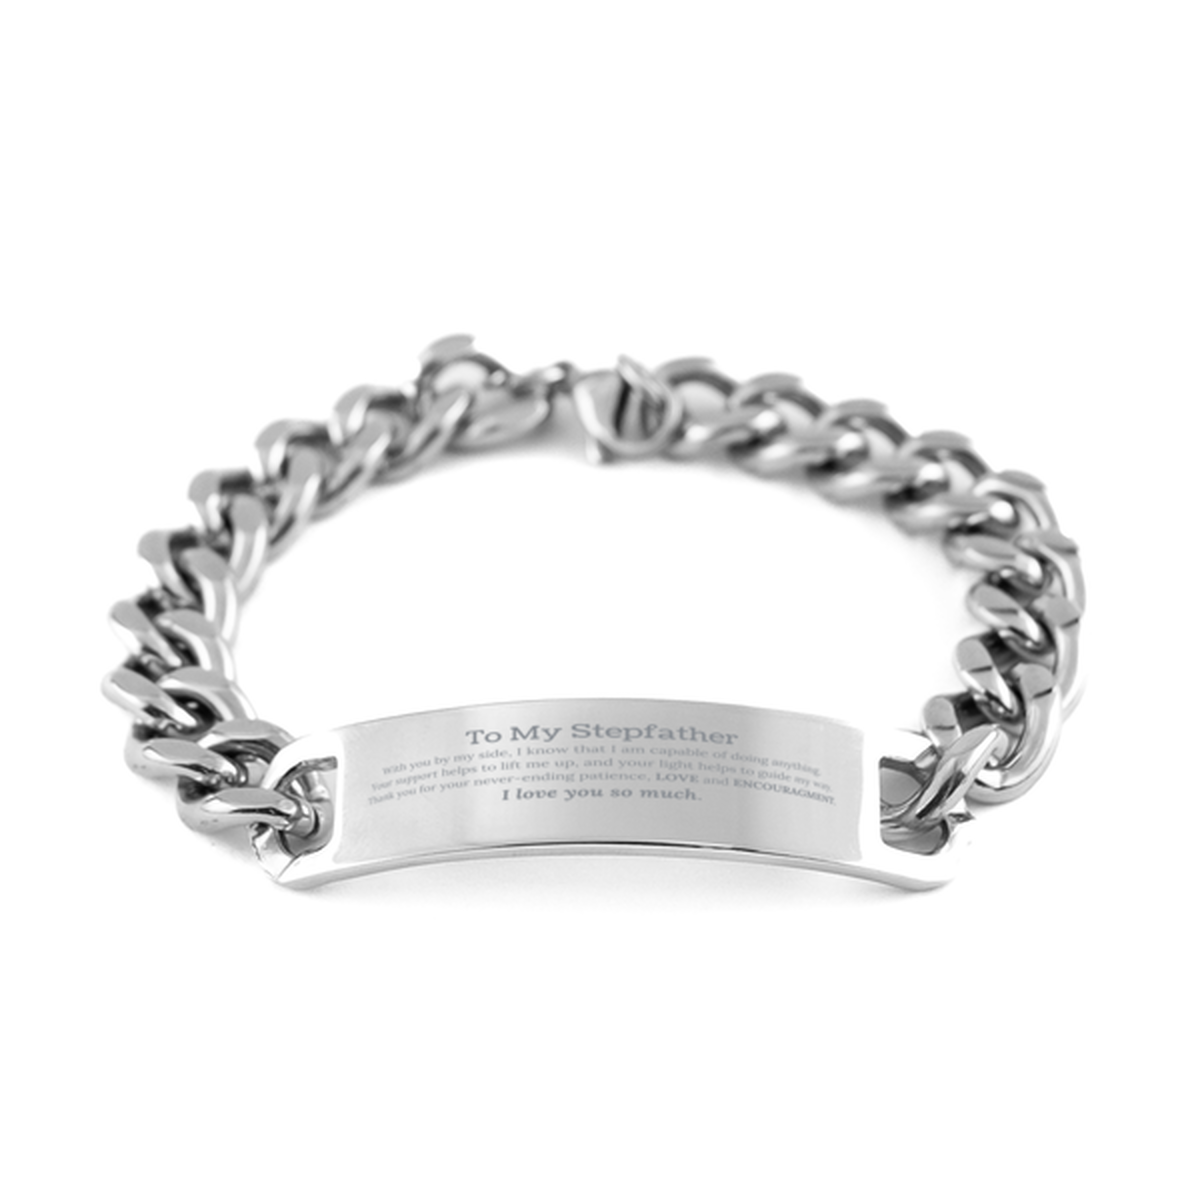 Appreciation Stepfather Cuban Chain Stainless Steel Bracelet Gifts, To My Stepfather Birthday Christmas Wedding Keepsake Gifts for Stepfather With you by my side, I know that I am capable of doing anything. I love you so much